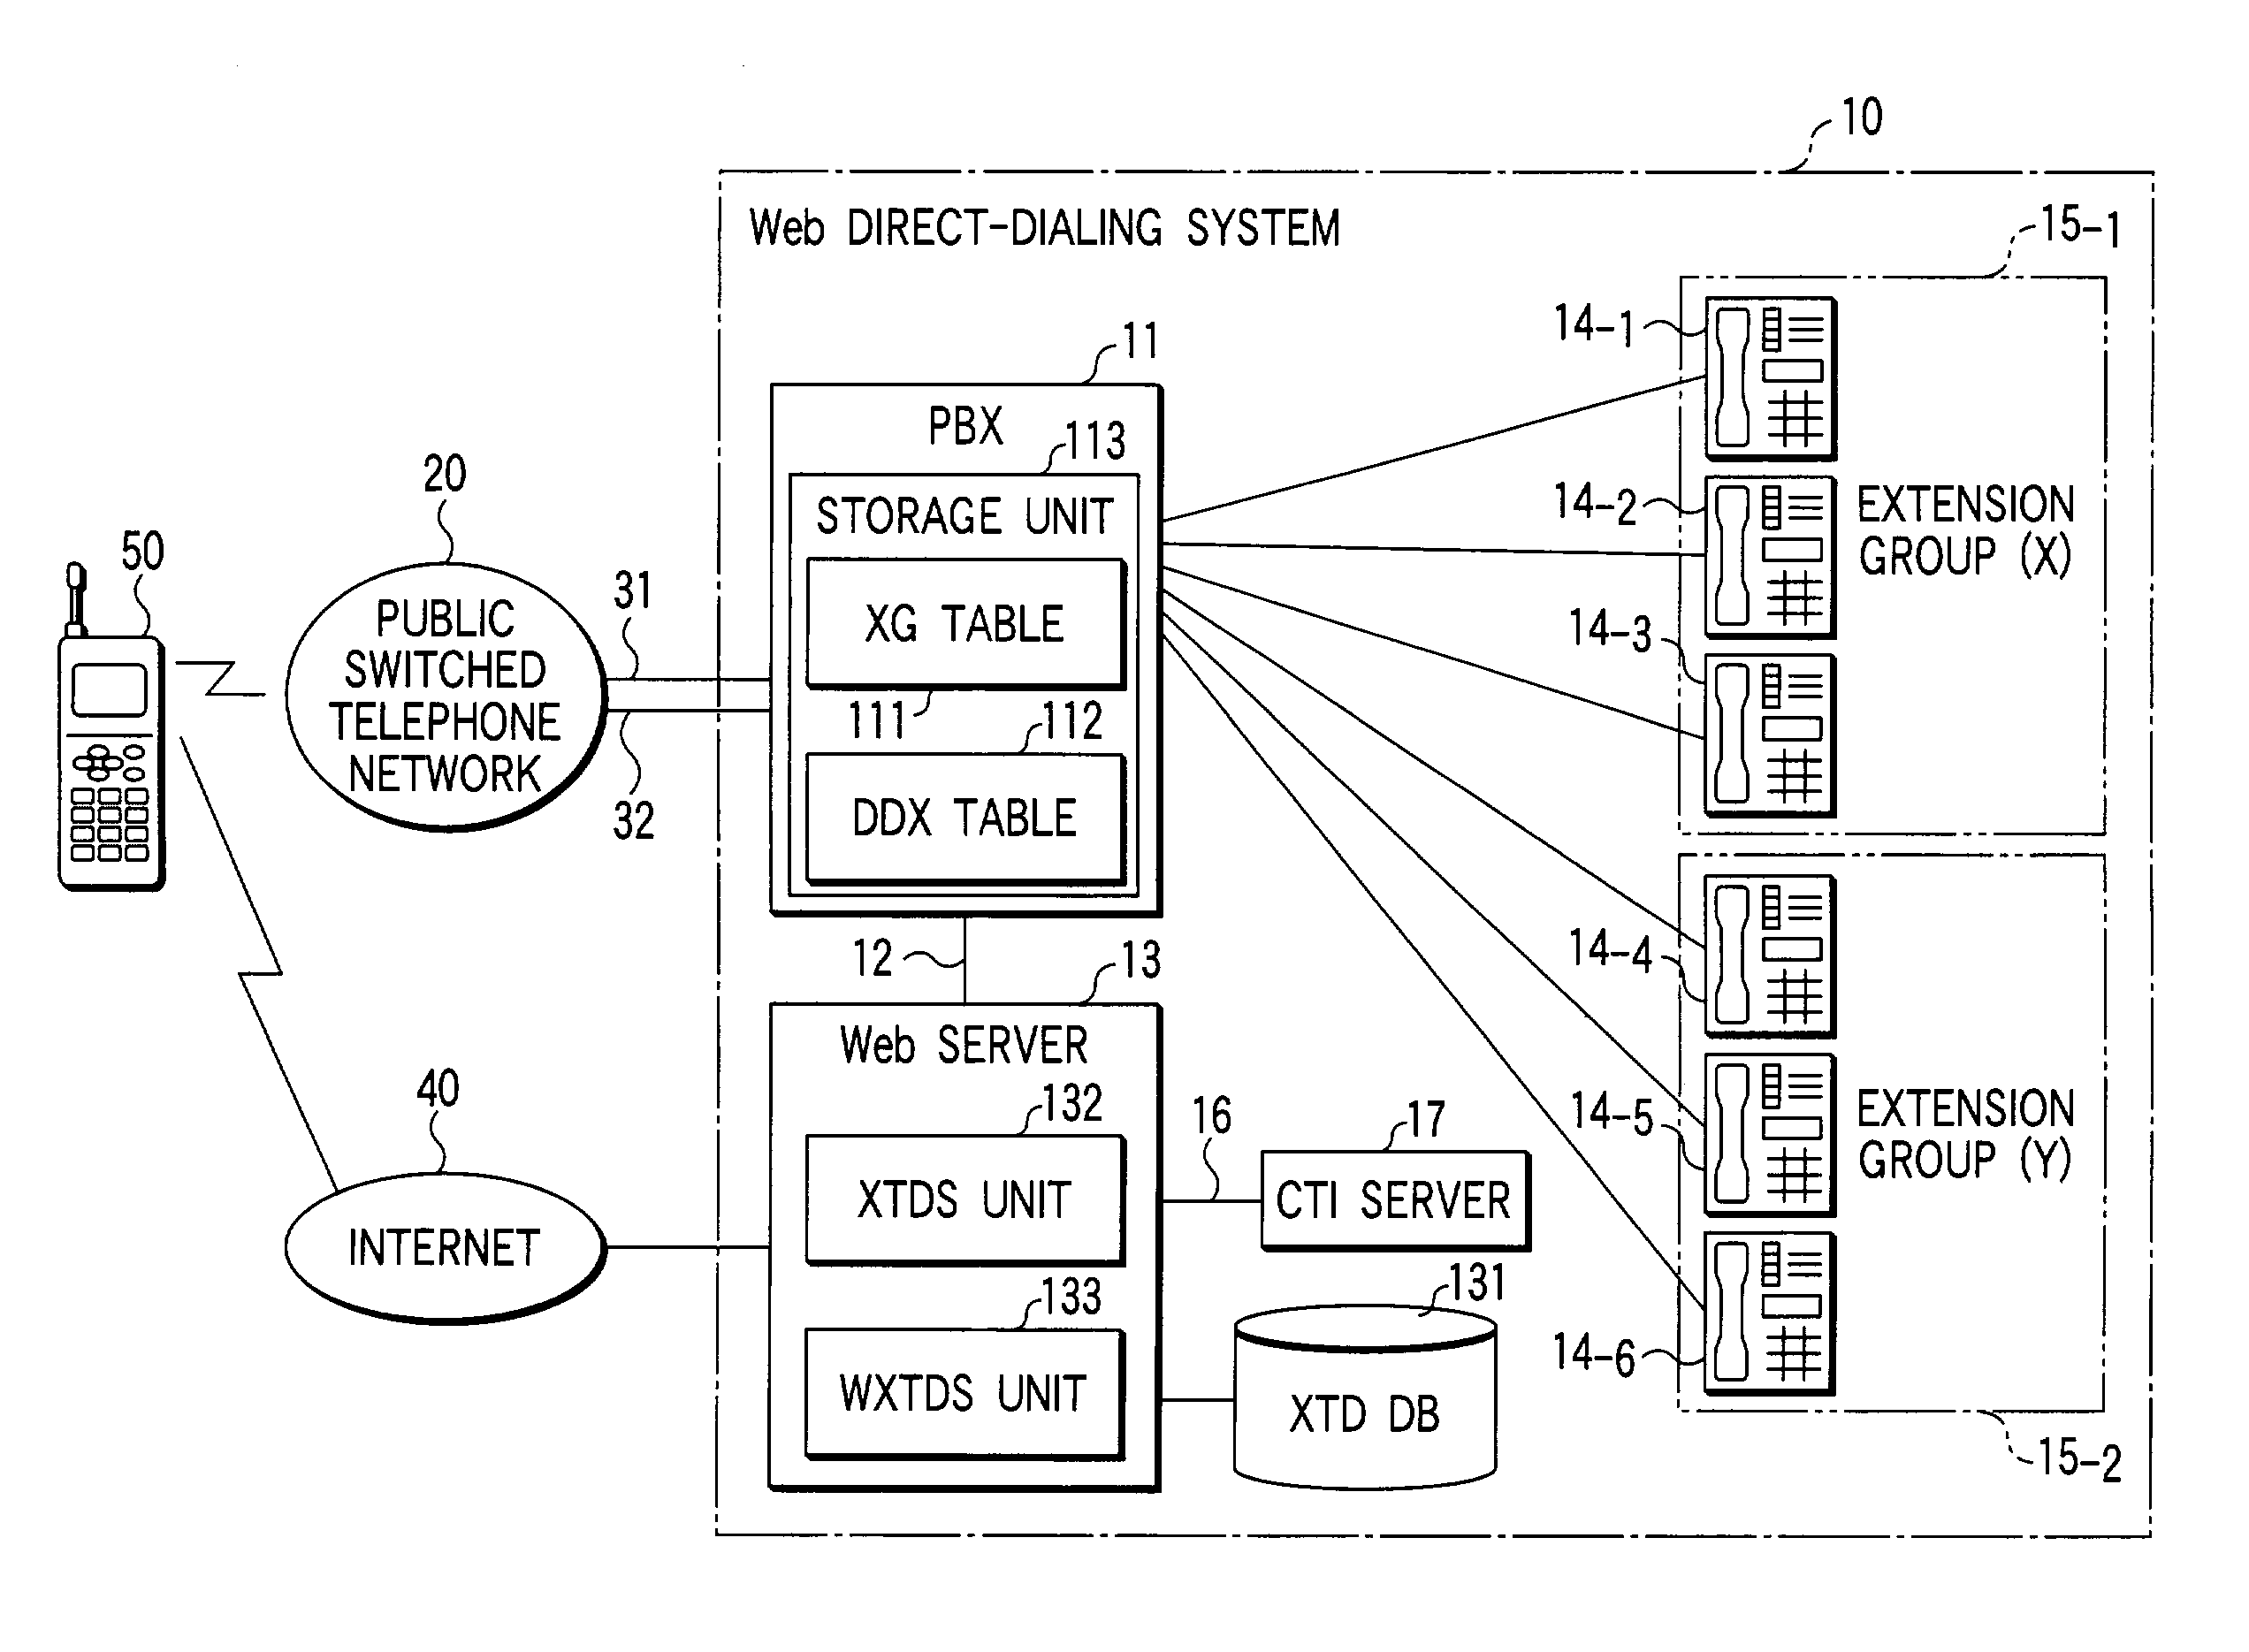 Method and apparatus for Web direct-dialing connection